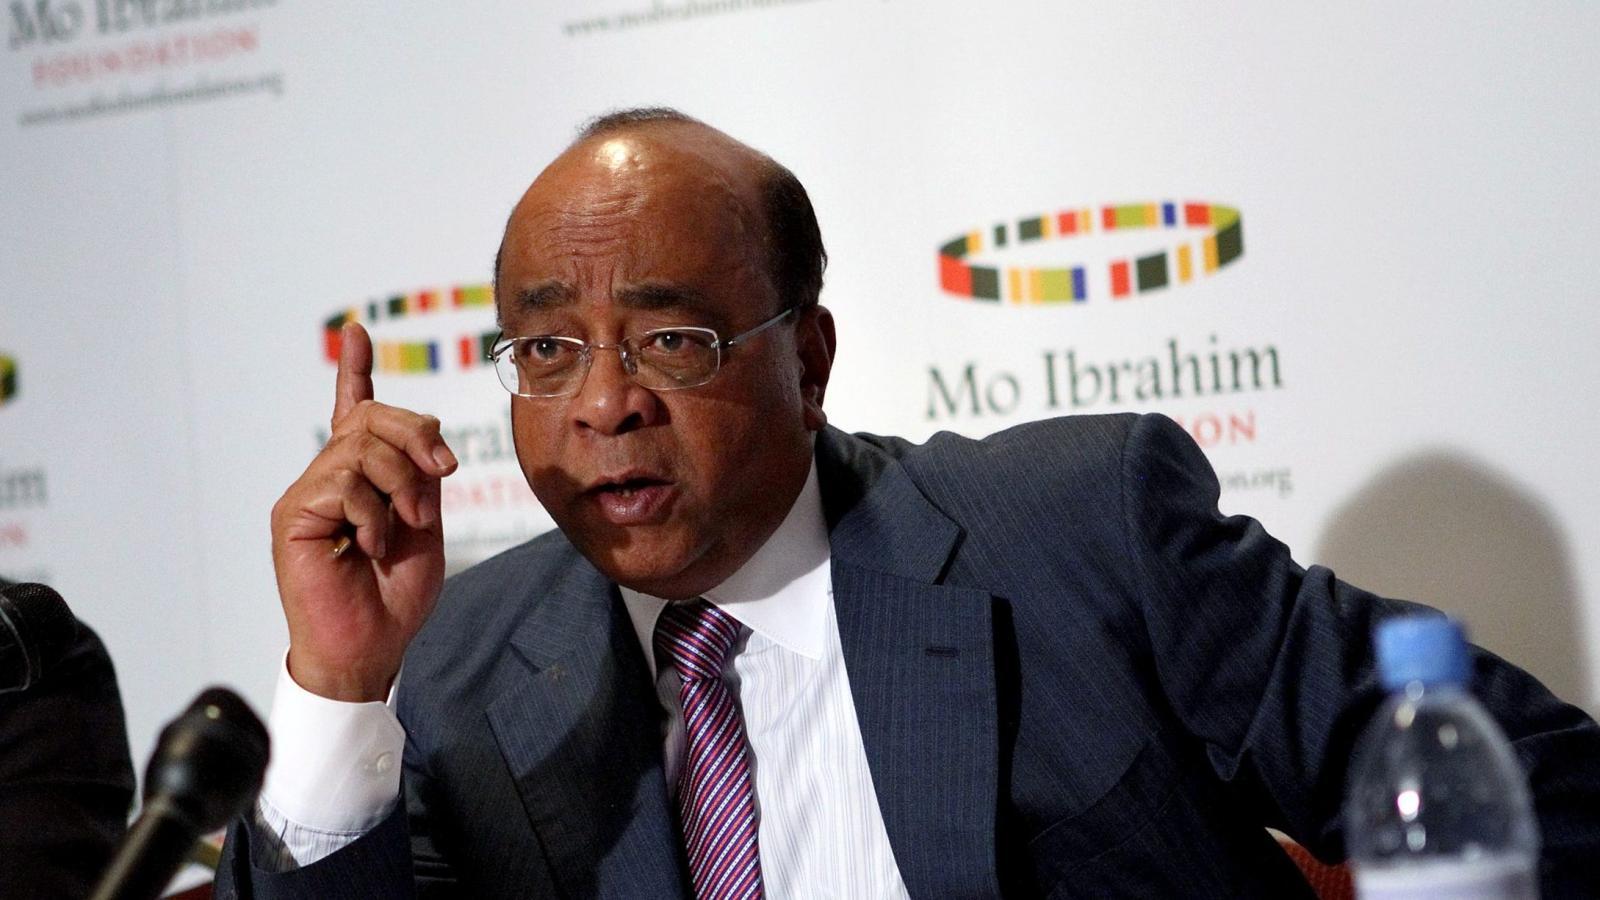 ‘Totally unacceptable’: Mo Ibrahim condemns crackdown on #EndSARS protesters